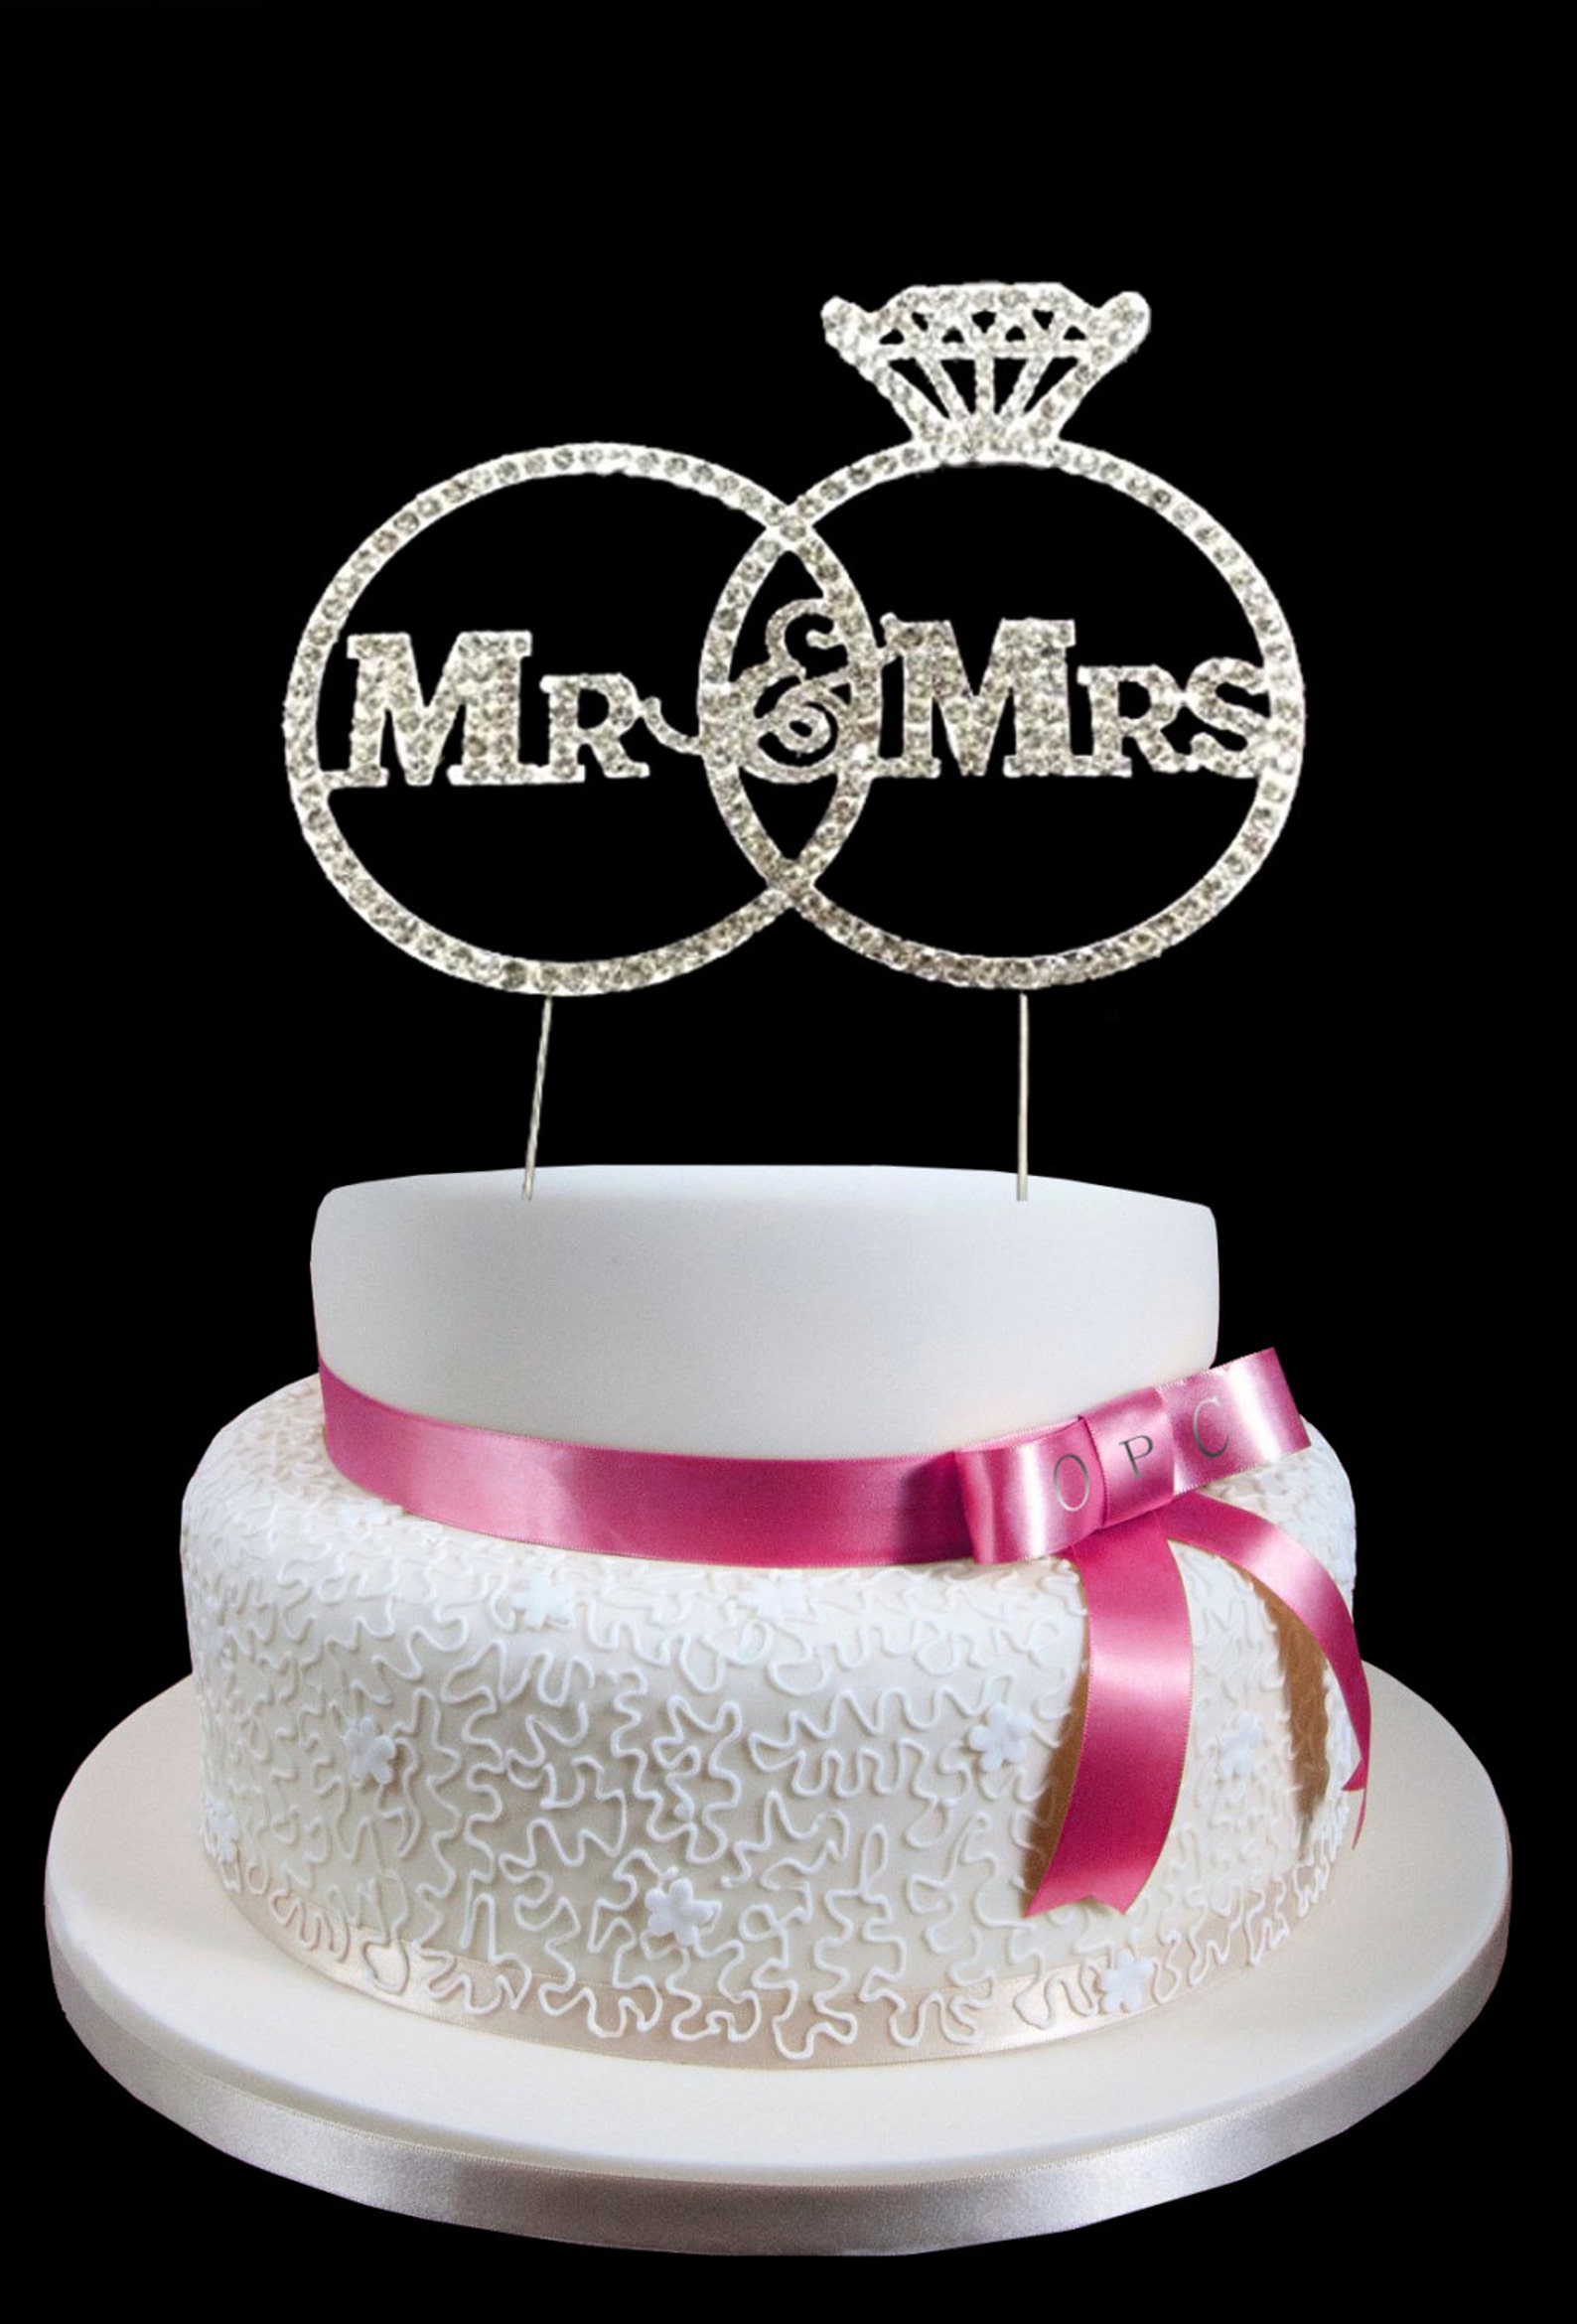 Silver & Rhinestone Mr and Mrs Cake Topper Decoration | Etsy